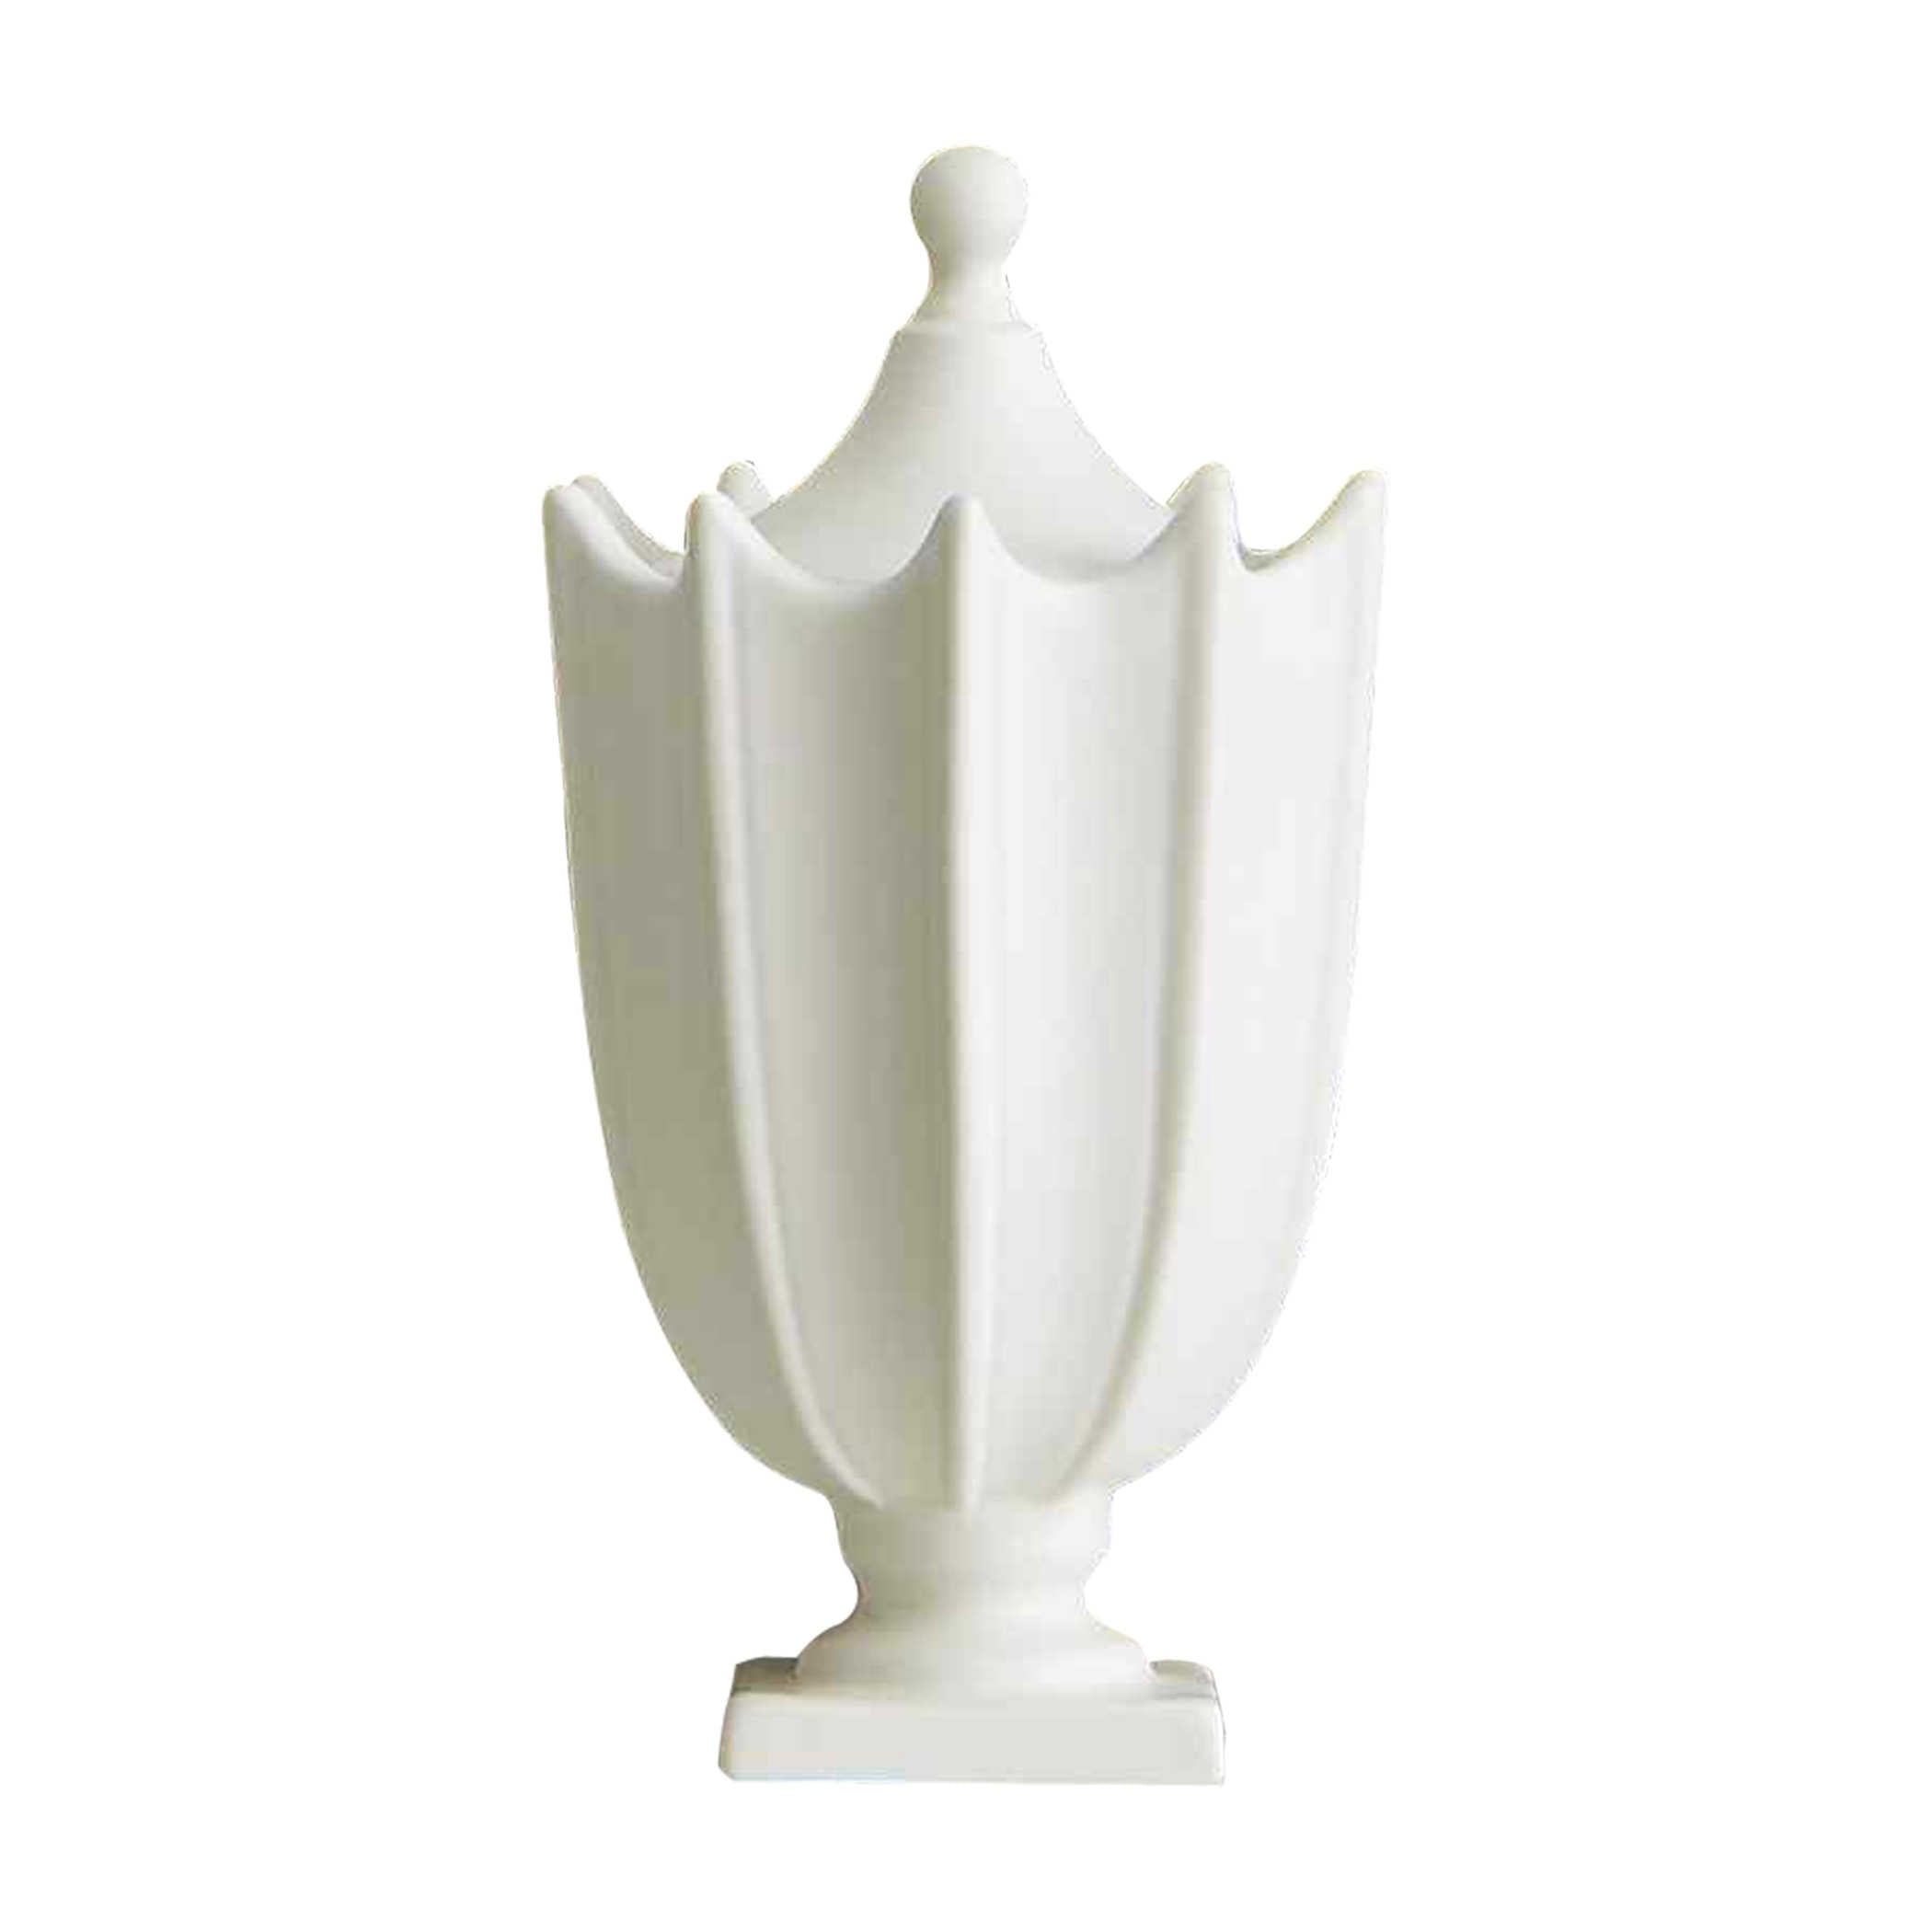 Crenulated Mini Urn - Danshire Market and Design , Ceramic urn inspired by classic Adam silver designs from early 19th century England is given an interesting new twist in a matte glaze finish.